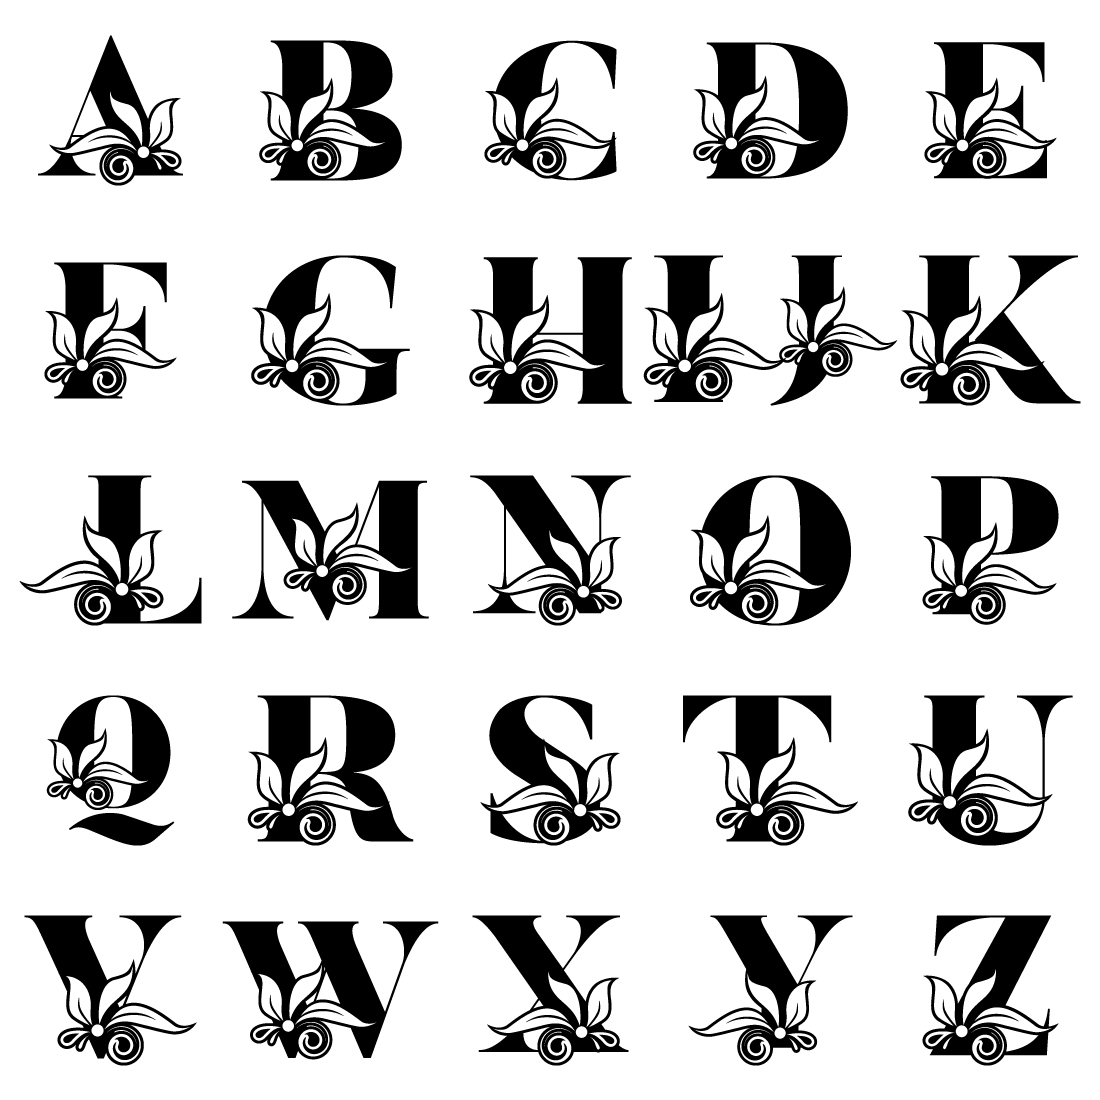 Wonderful image of the letters of the alphabet in a floral design